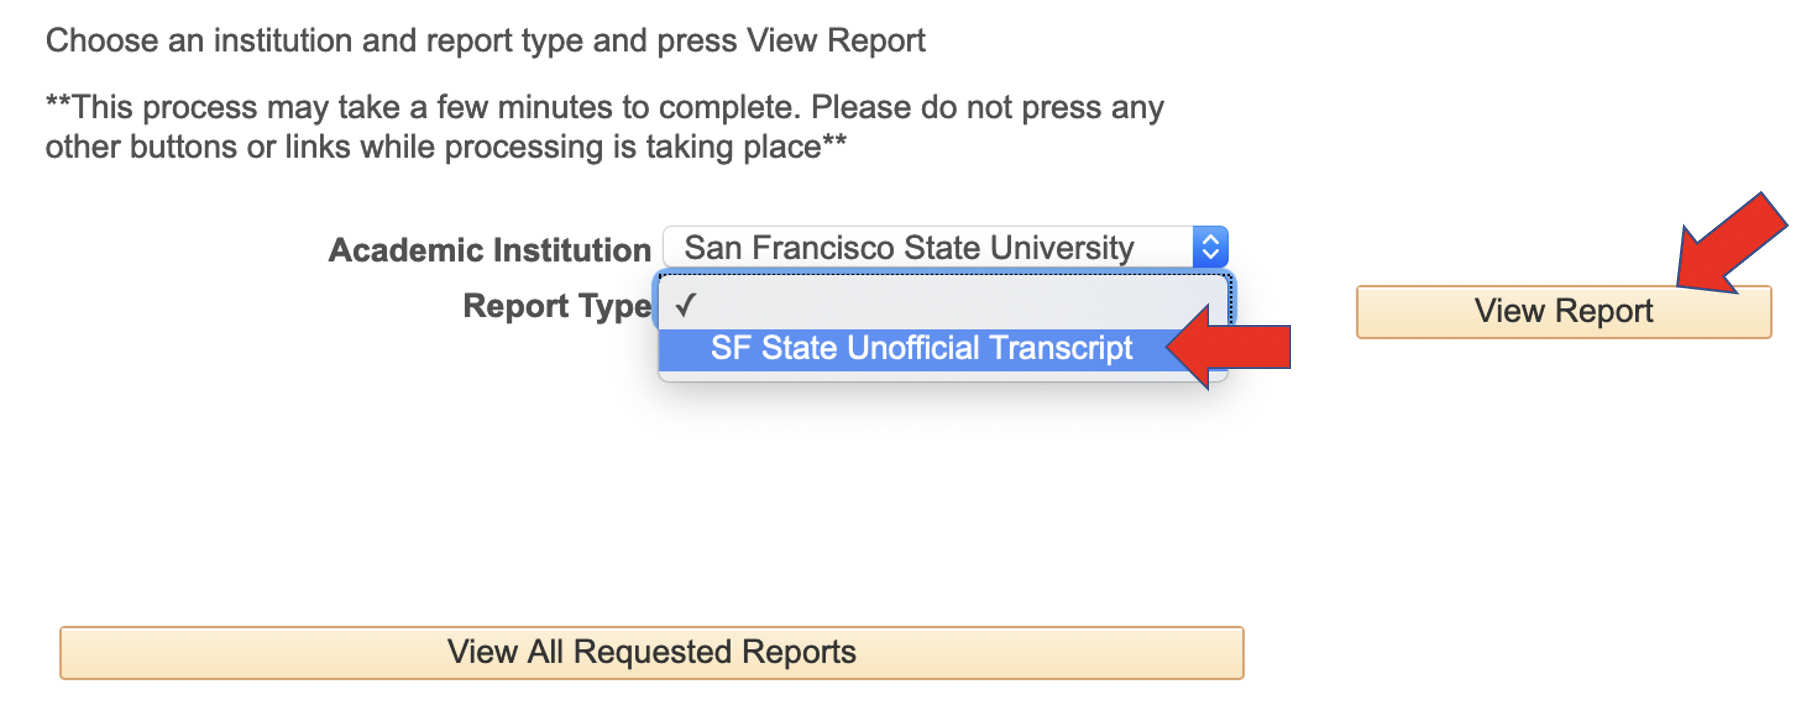 View report button to click to click to see the unofficial transcript